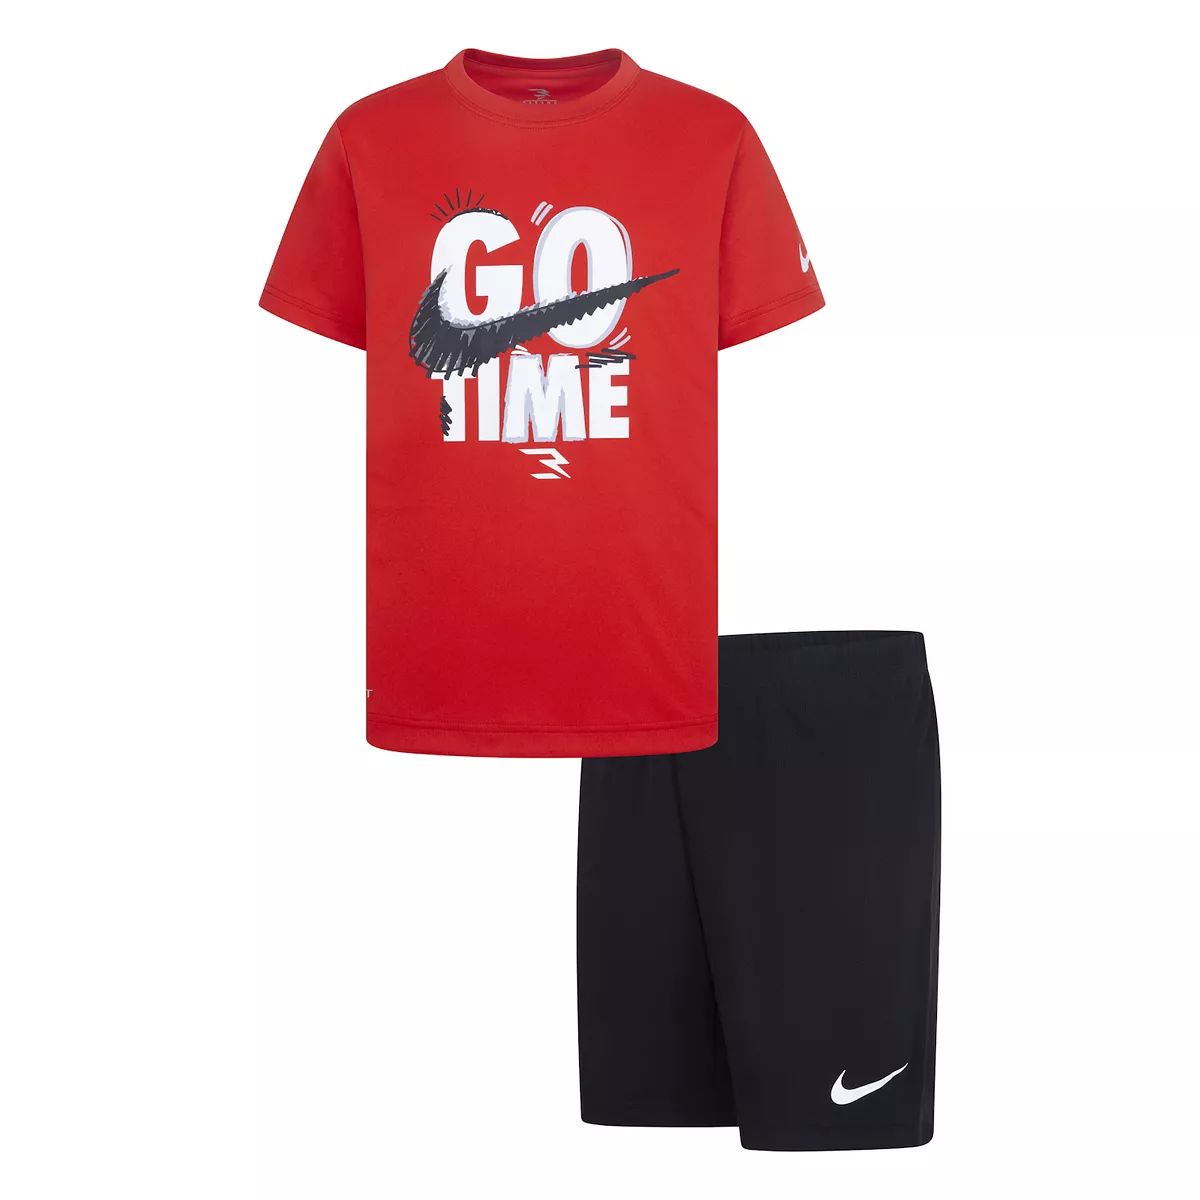 Boys 8-20 Nike 3BRAND by Russell Wilson "Go Time" Dri-FIT T-shirt and Athletic Shorts Set | Kohl's